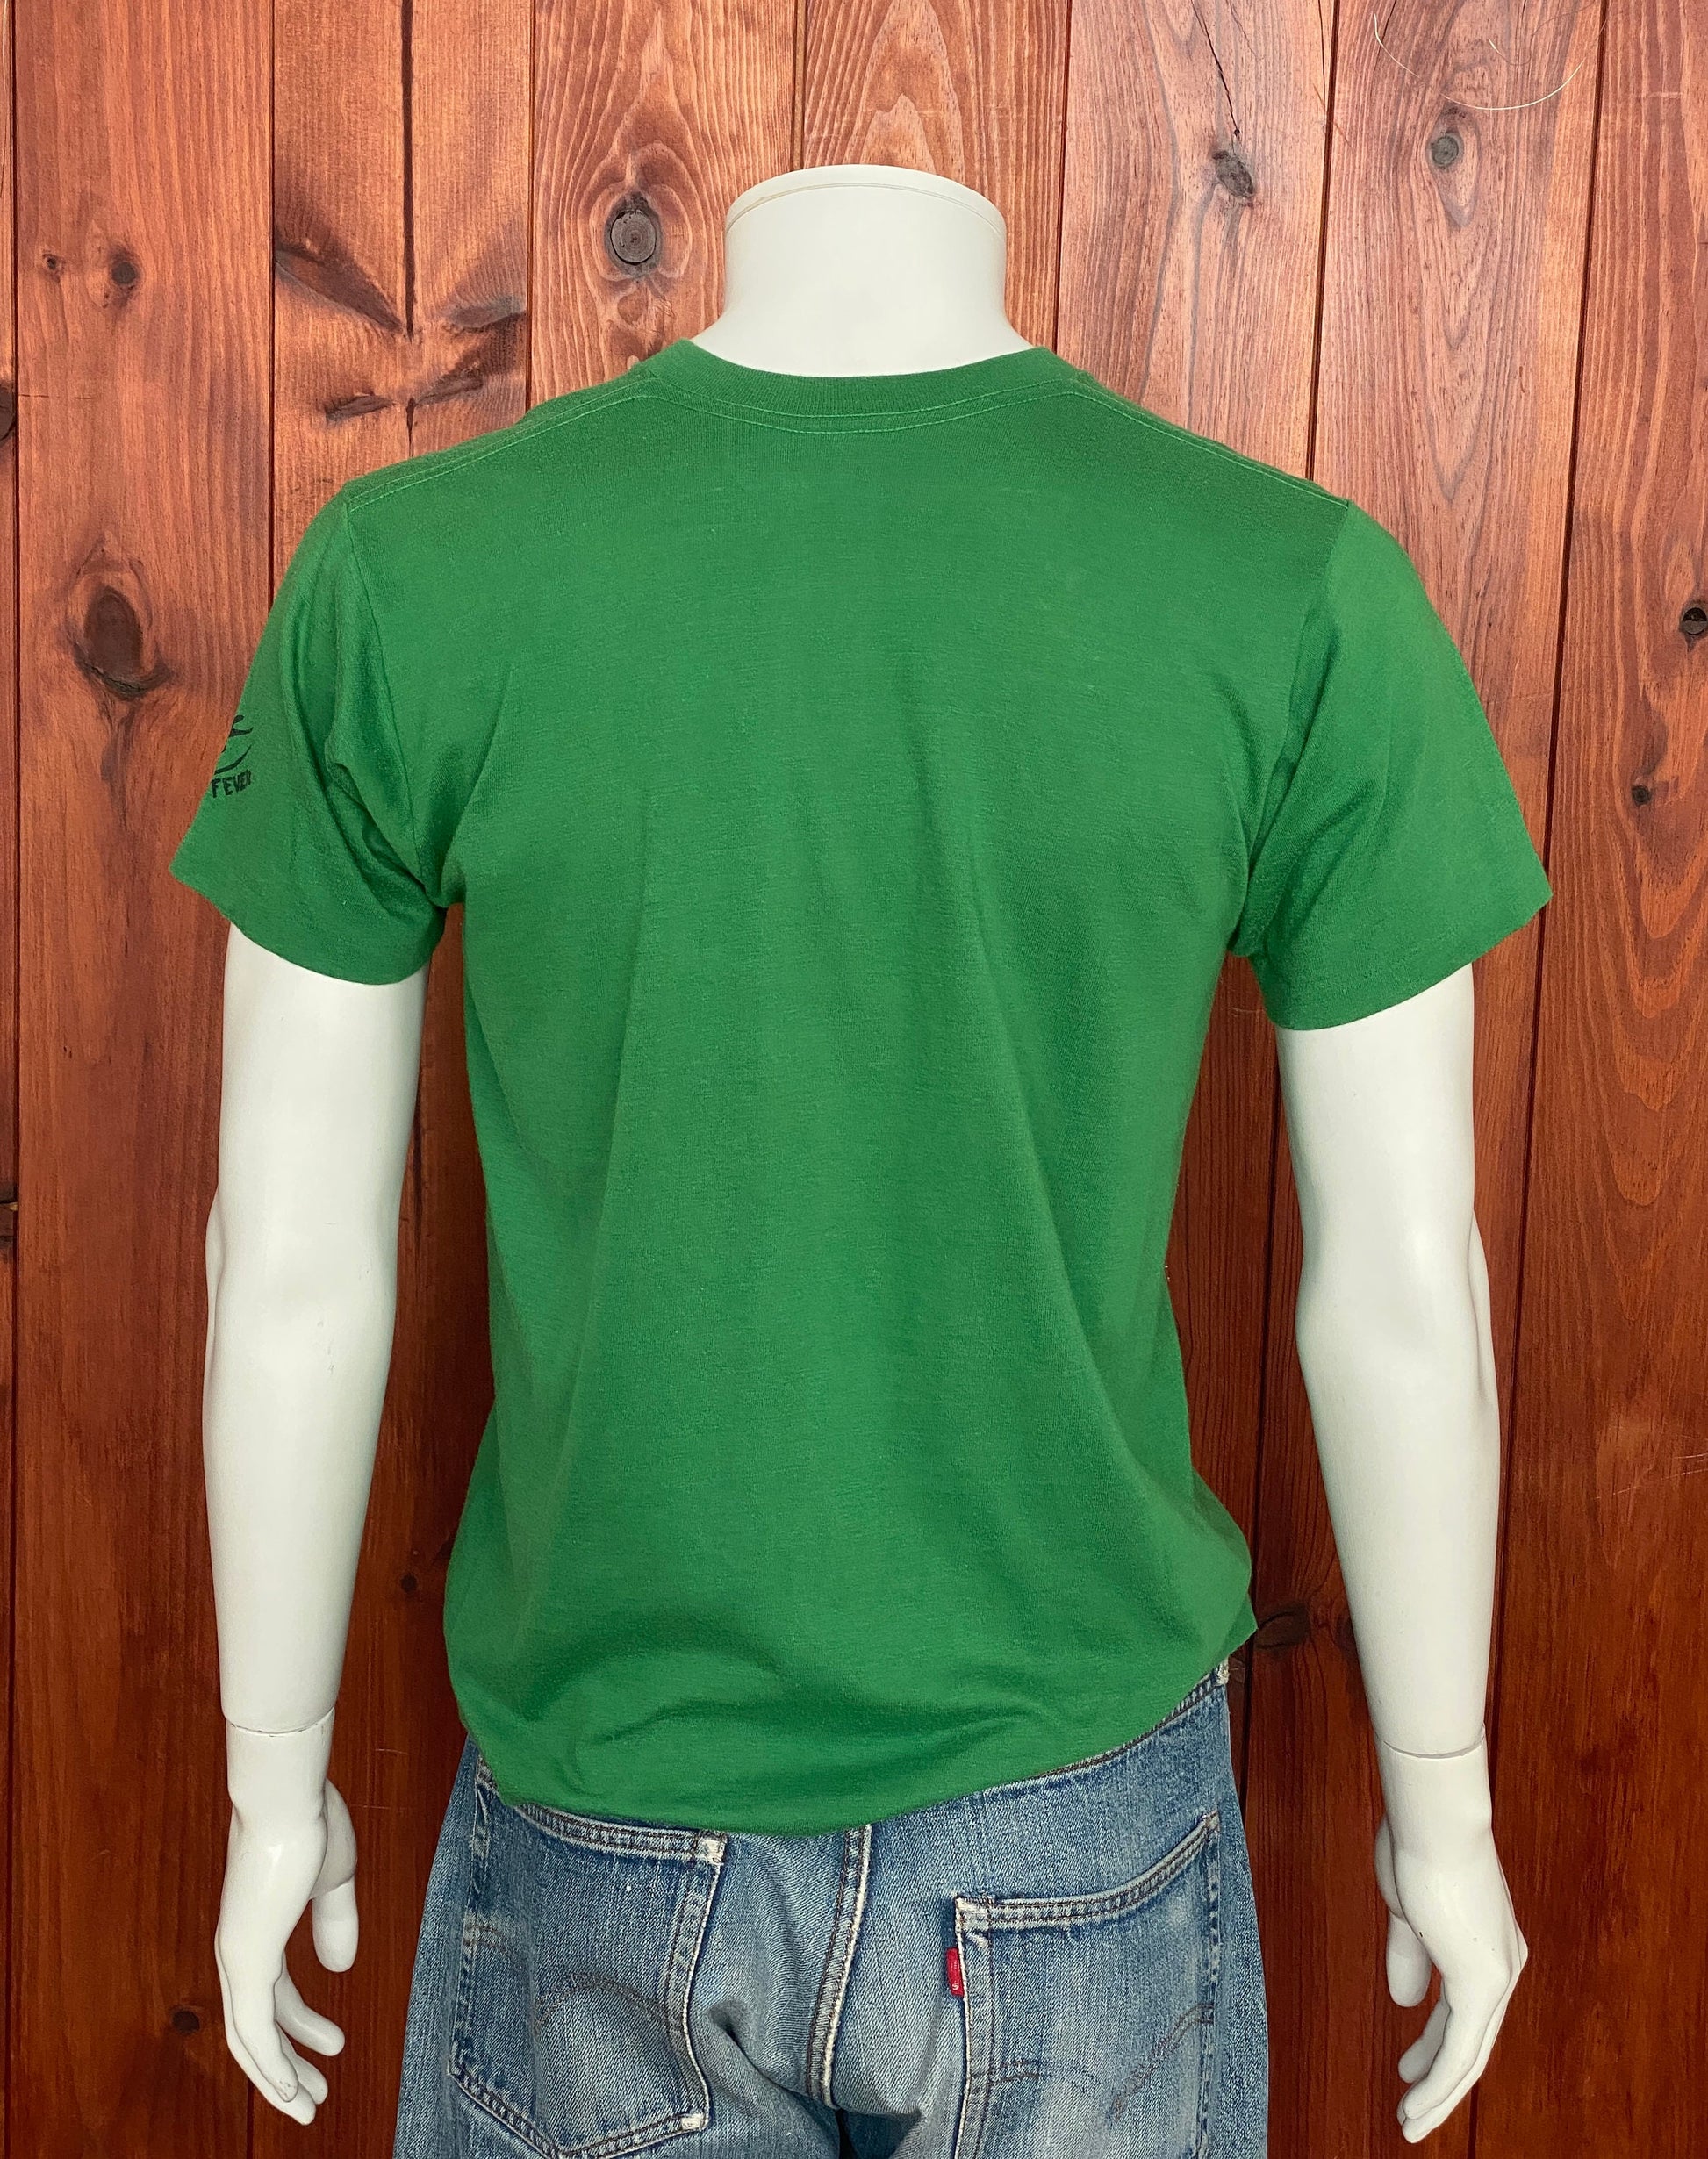 Large Authentic 50/50 Vintage 90s T-shirt Made In USA | Classic Retro Apparel